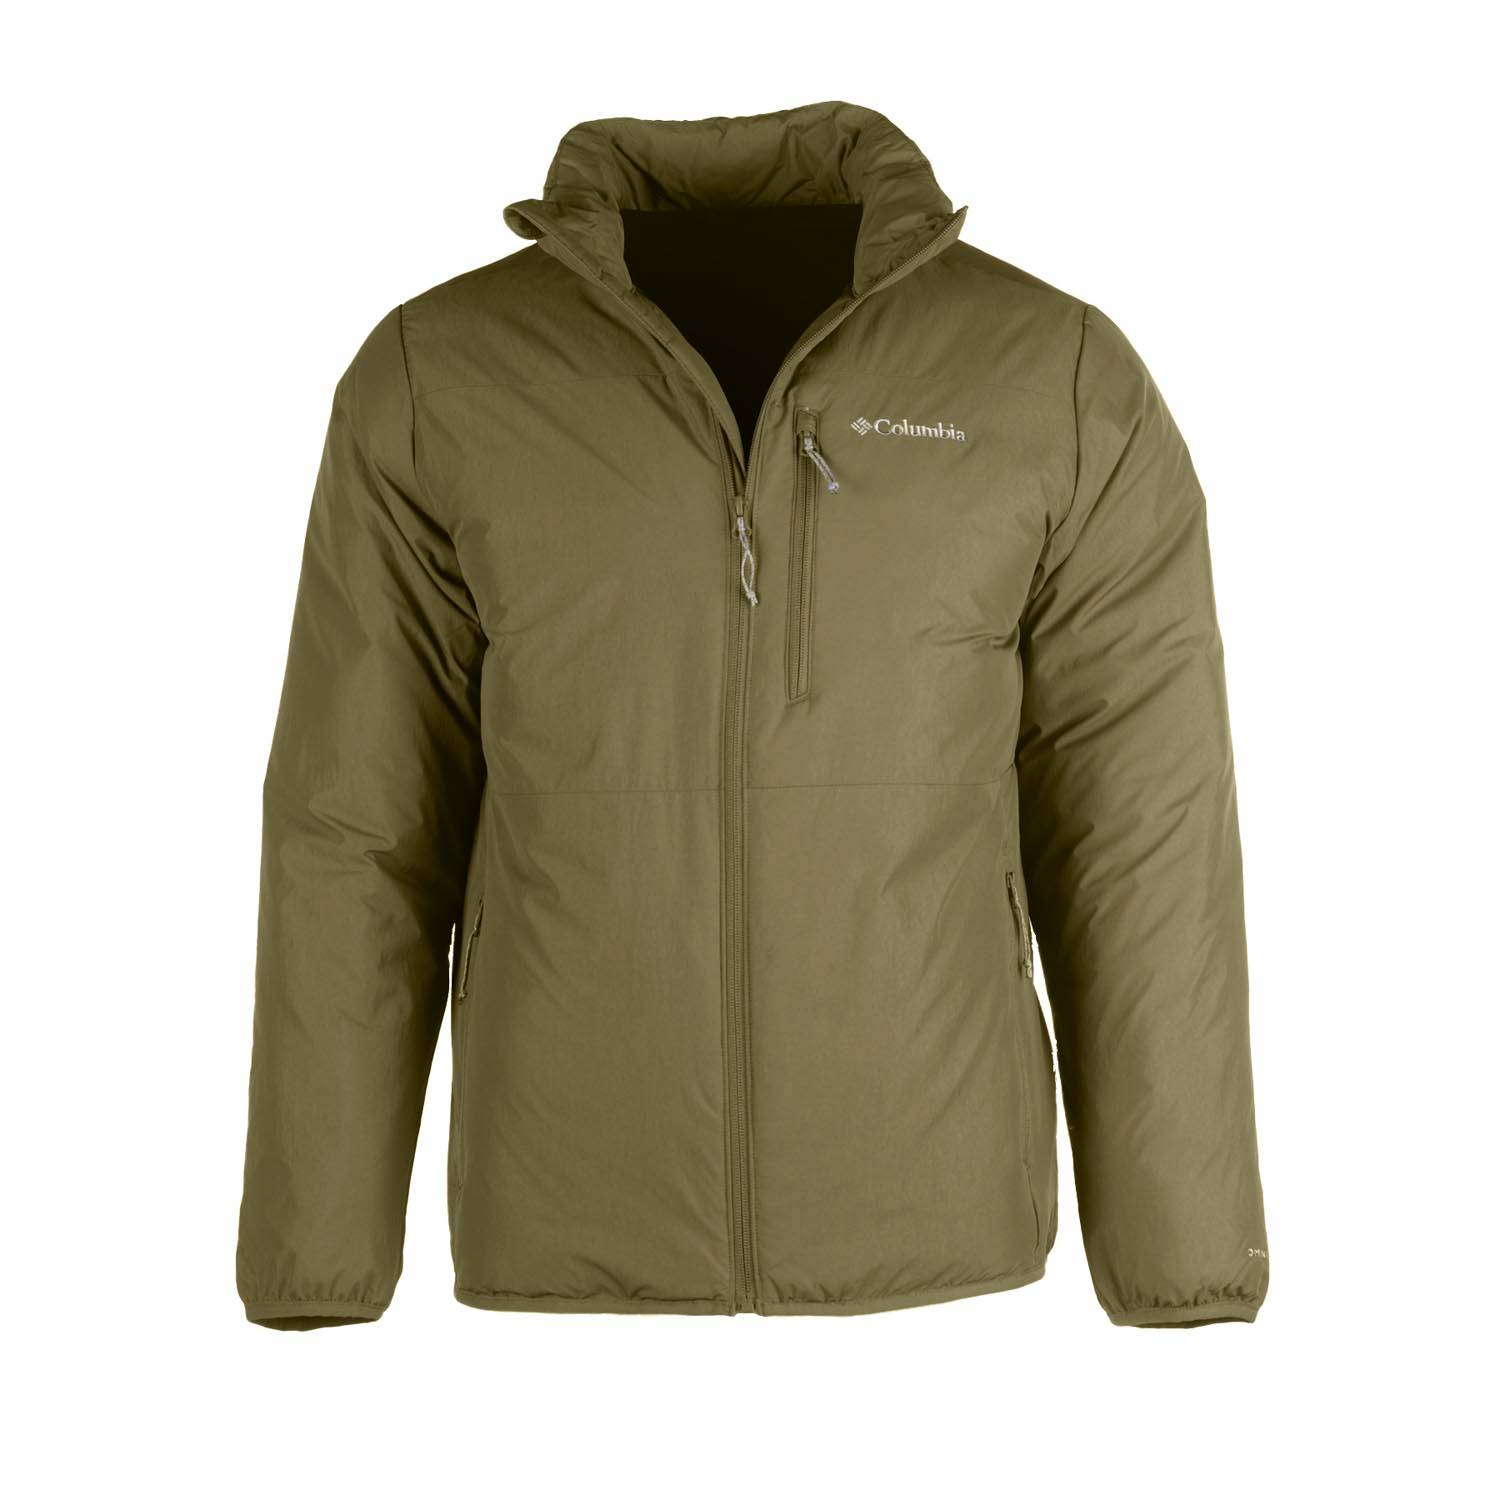 Columbia Men's Grand Wall Jacket | Insulated Jackets